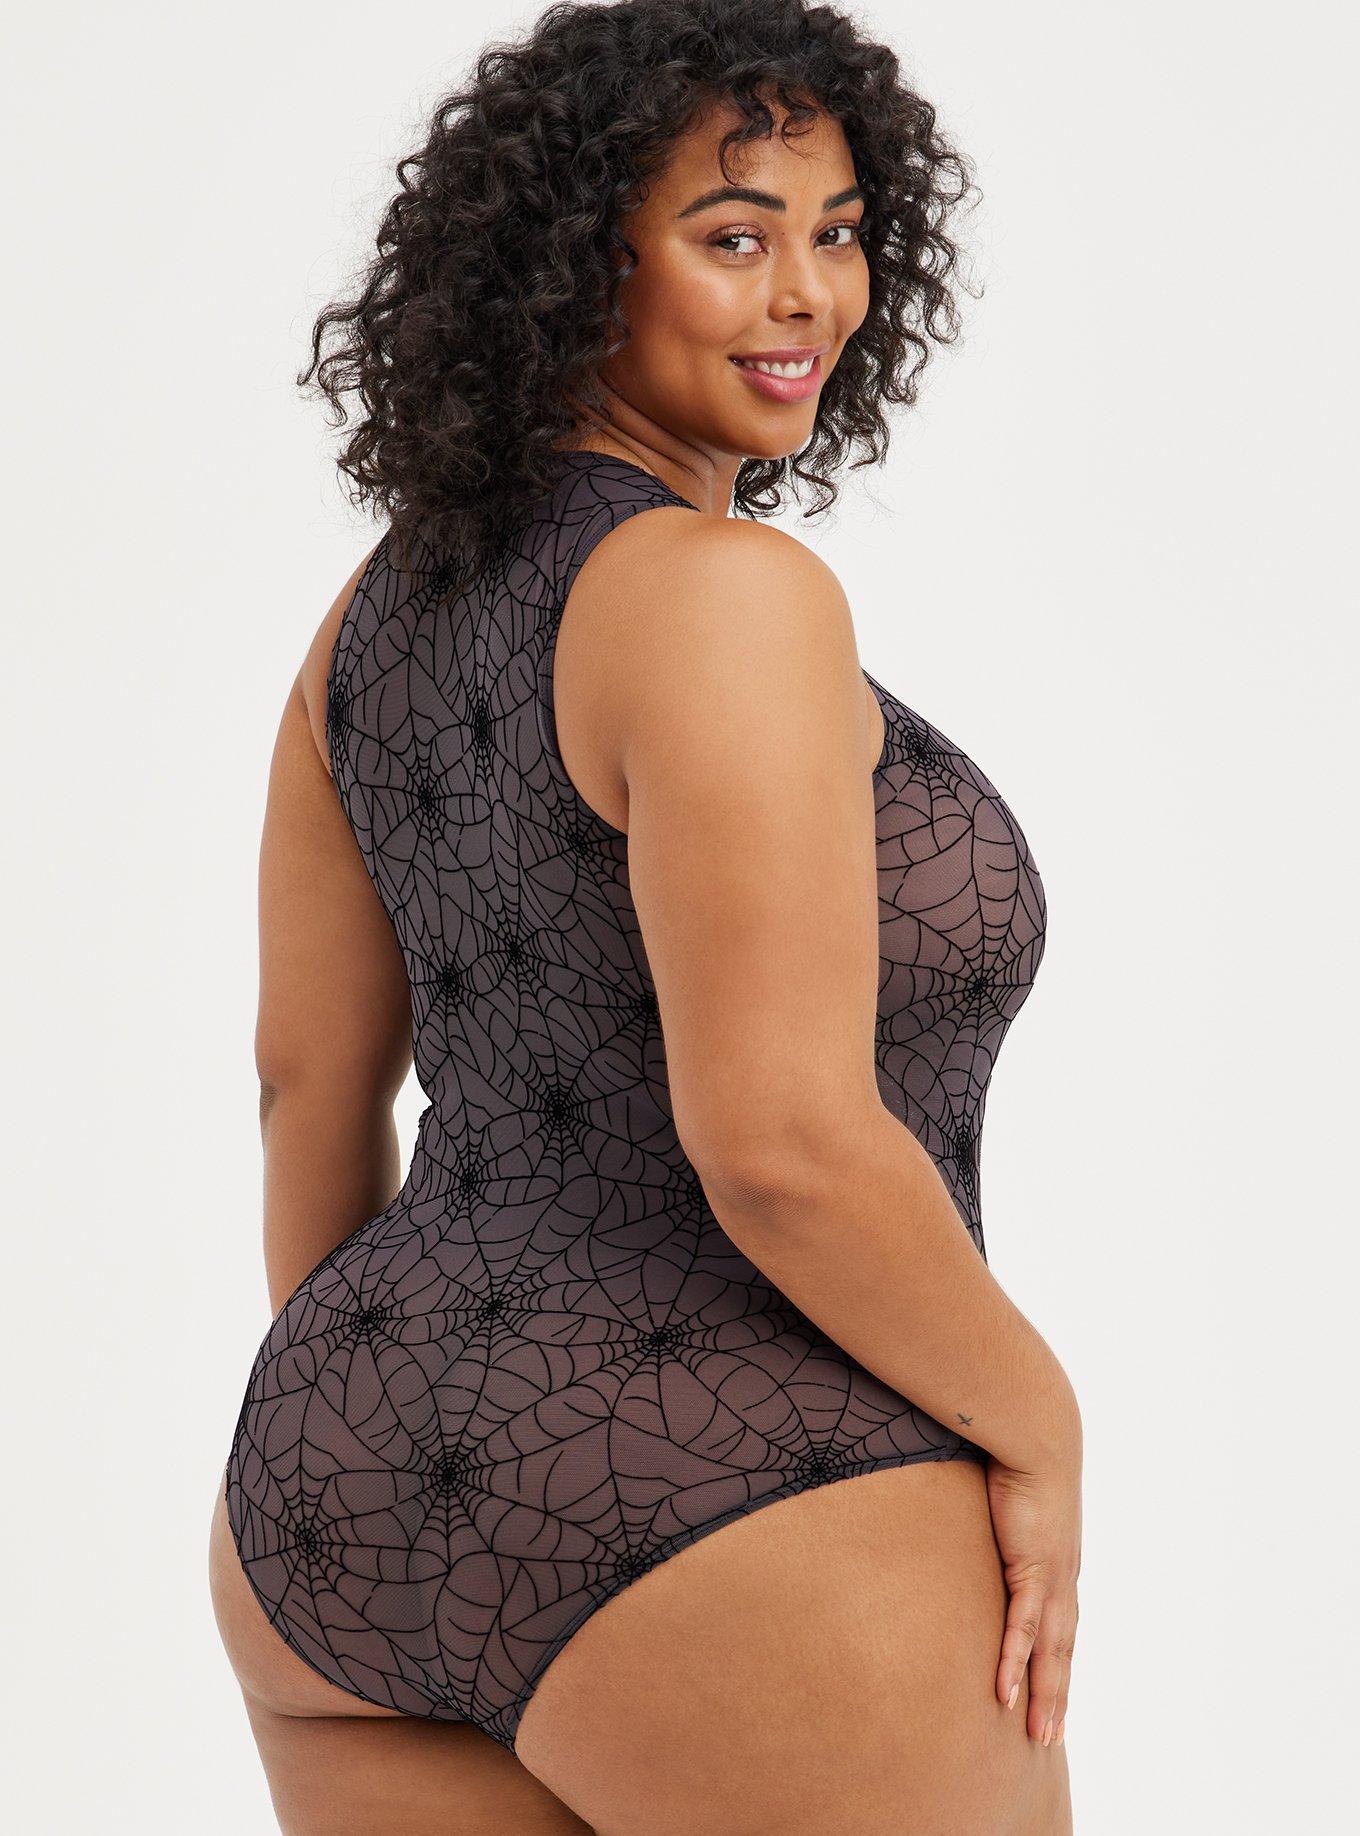 Goddess Plus-size Body Suit [Body suit] [Plus-size] [Holiday